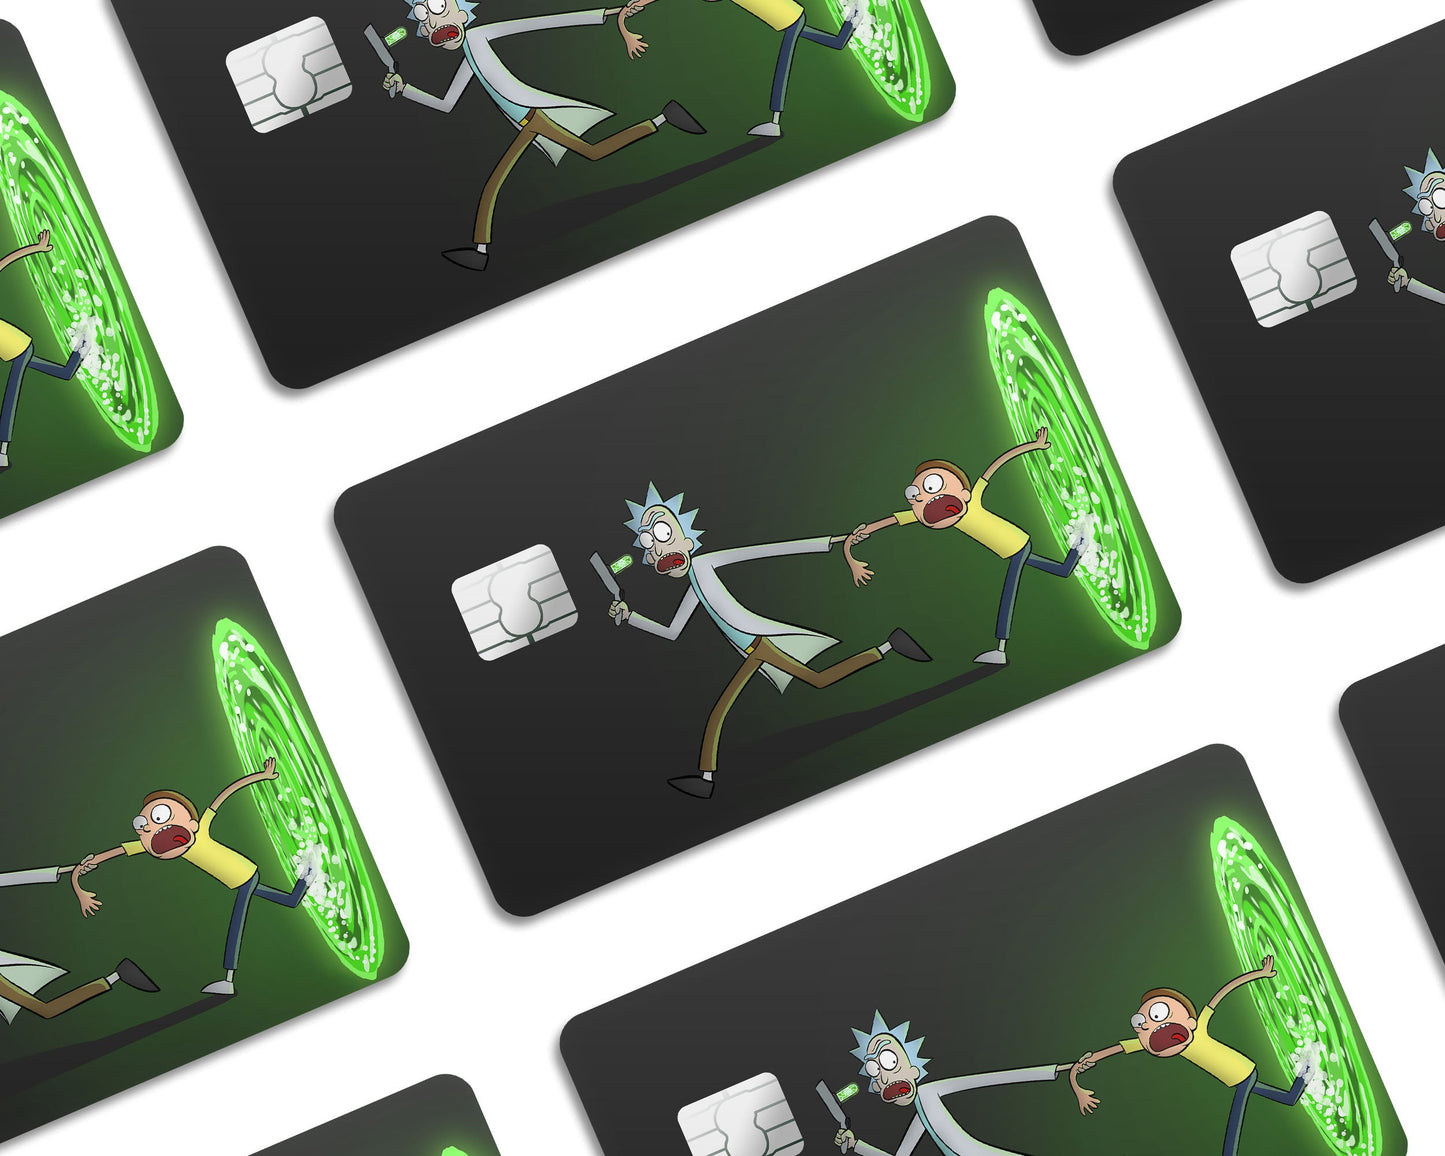 Anime Town Creations Credit Card Rick and Morty Portal Escape Window Skins - Anime Rick and Morty Credit Card Skin